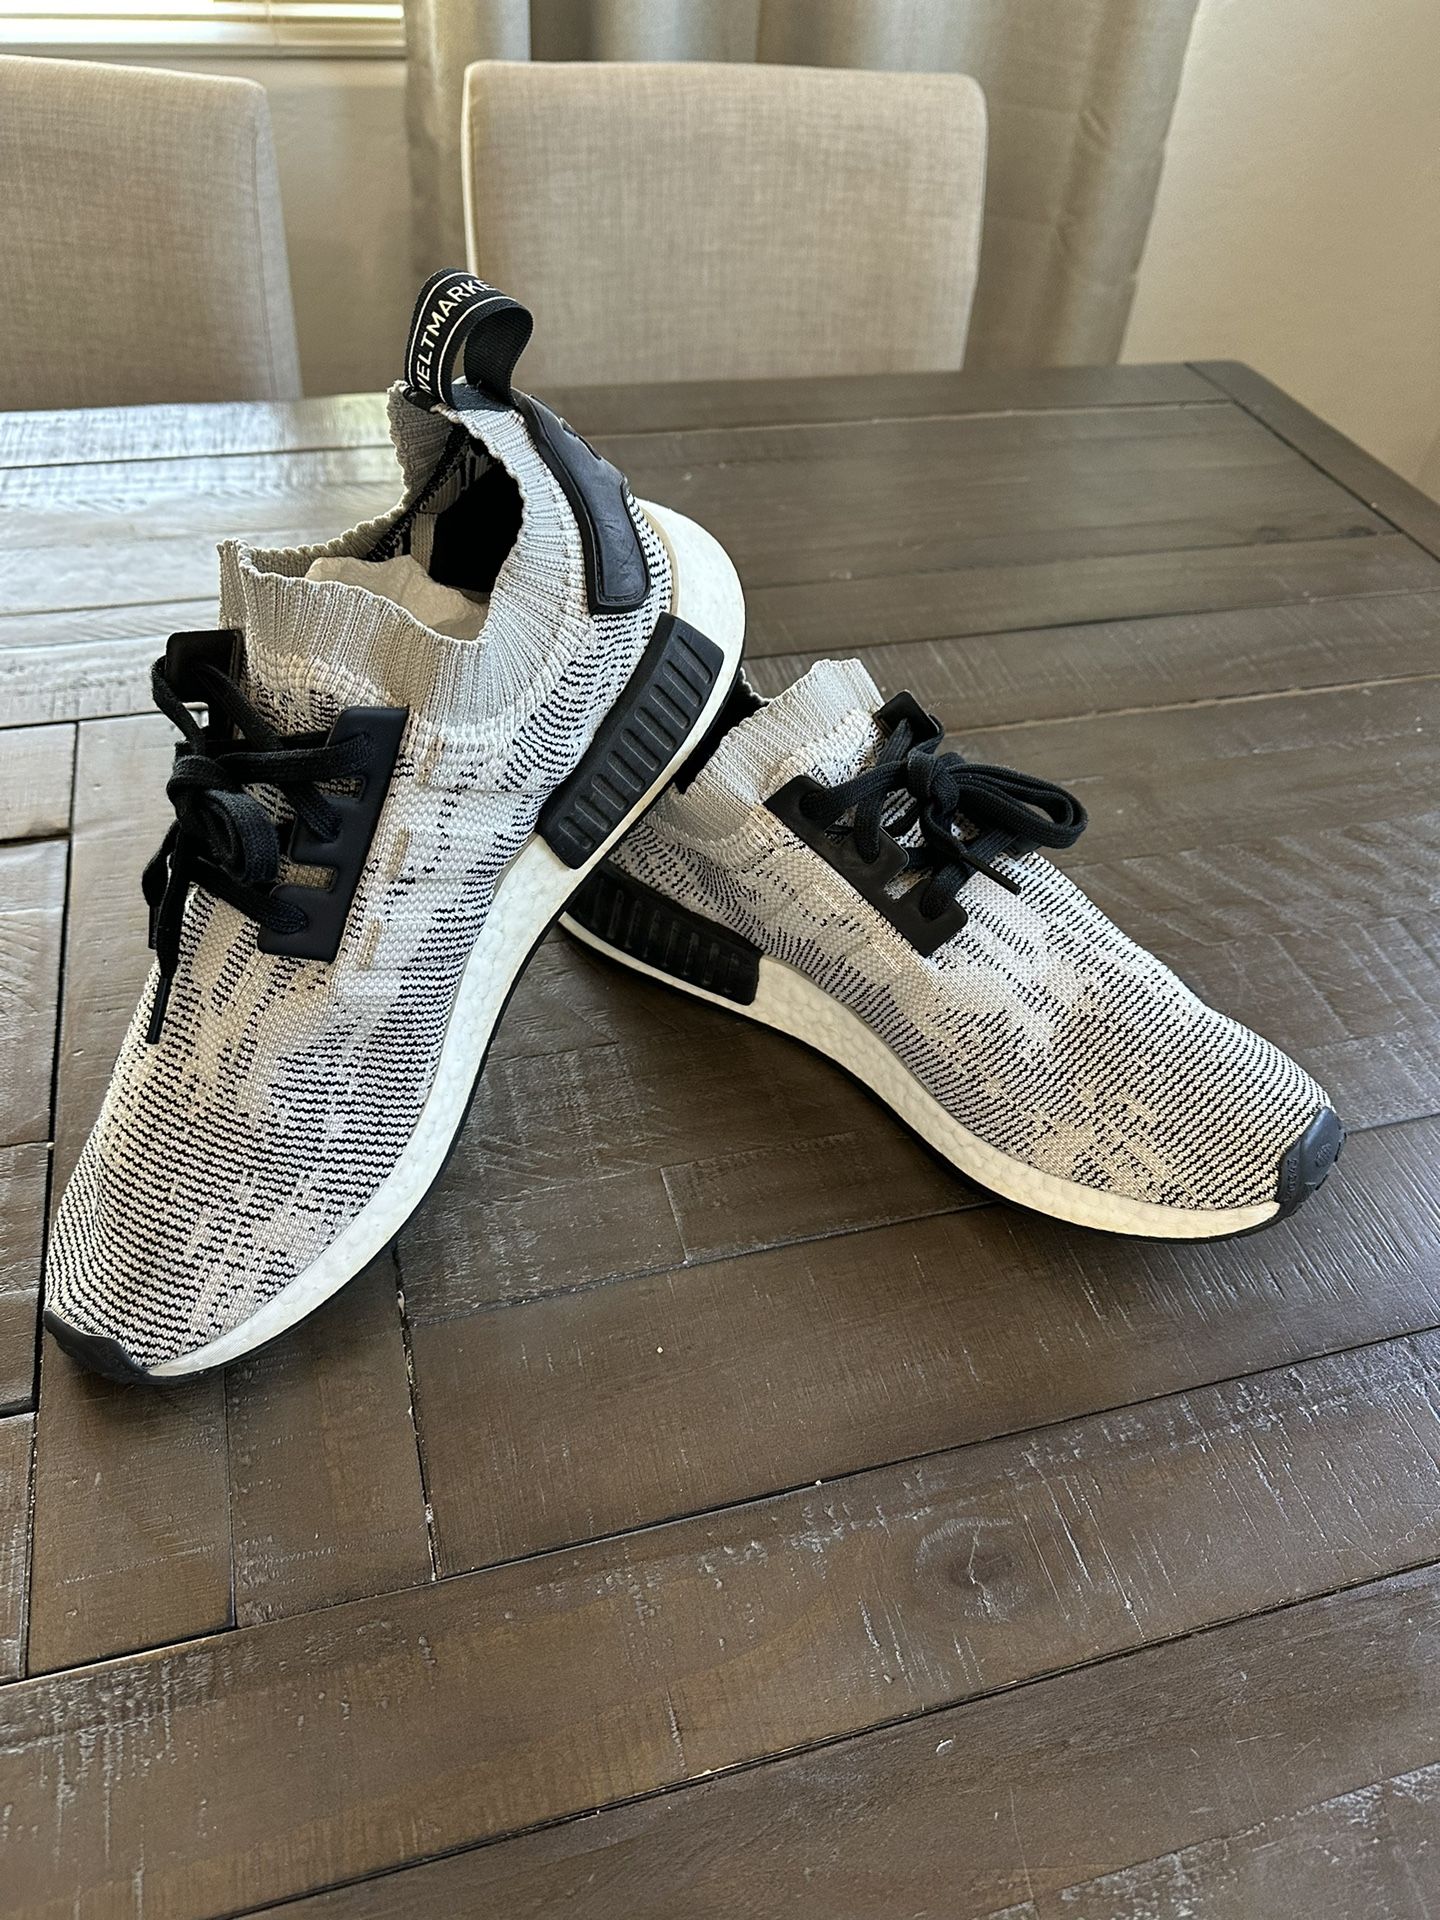 Black and White Adidas NMD’S